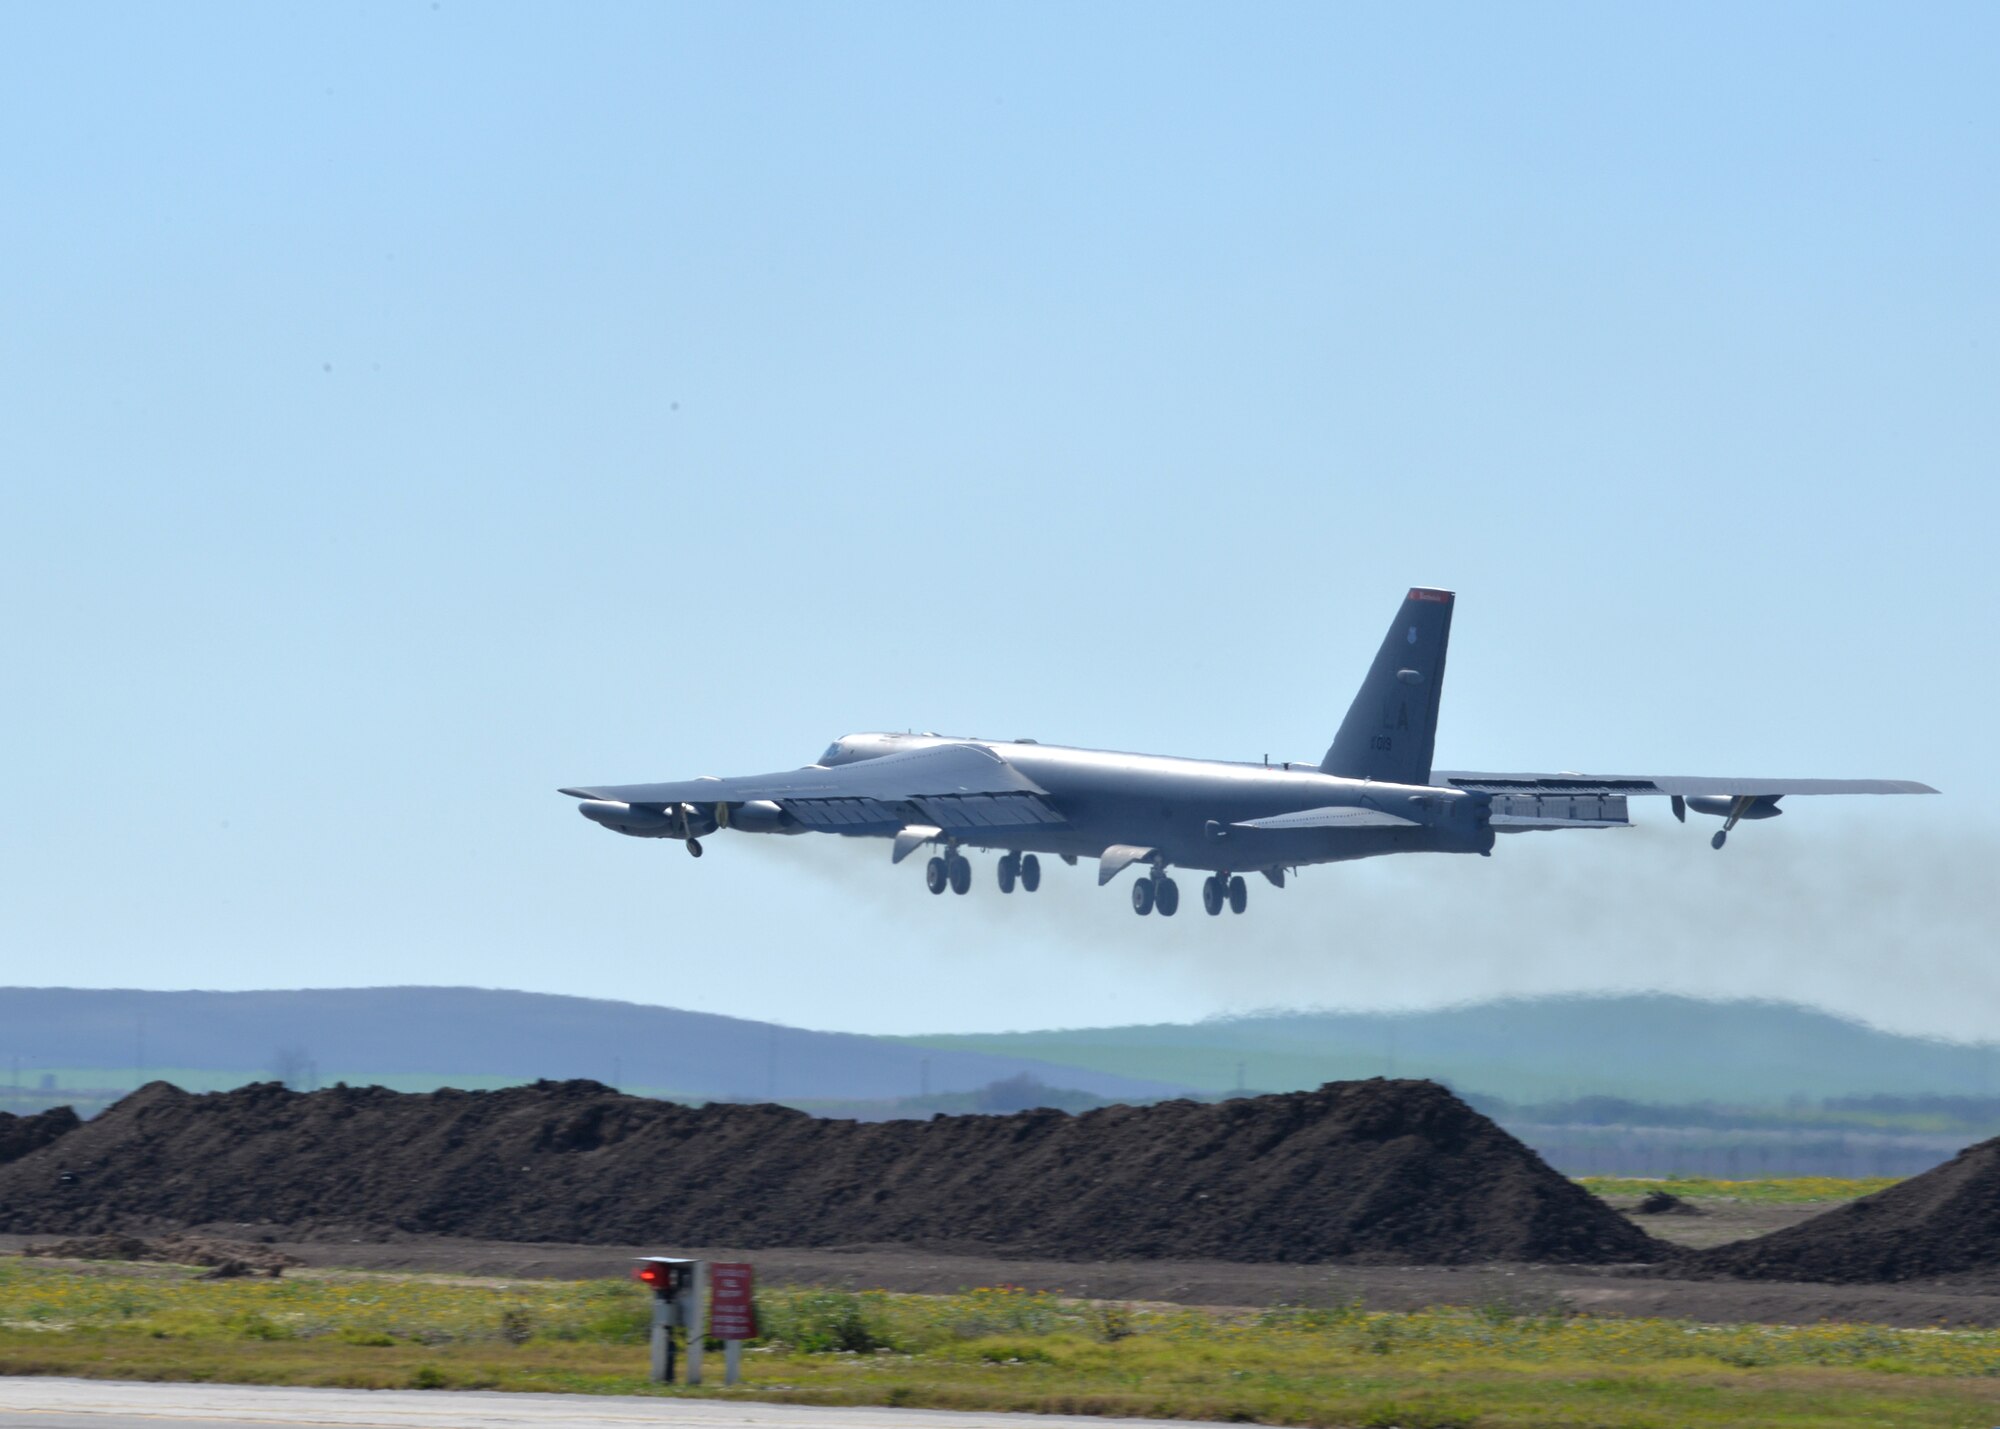 A B-52 Stratofortress begins its journey from Morón Air Base, Spain, to the Canary Islands to meet with Spanish Air Force counterparts for a joint-defense air counter tactics exercise, Feb. 29, 2016. Training and integrating with NATO allies like Spain demonstrate that we share a commitment to promoting the security and stability of the Alliance. (U.S. Air Force photo/Senior Airman Joseph Raatz)